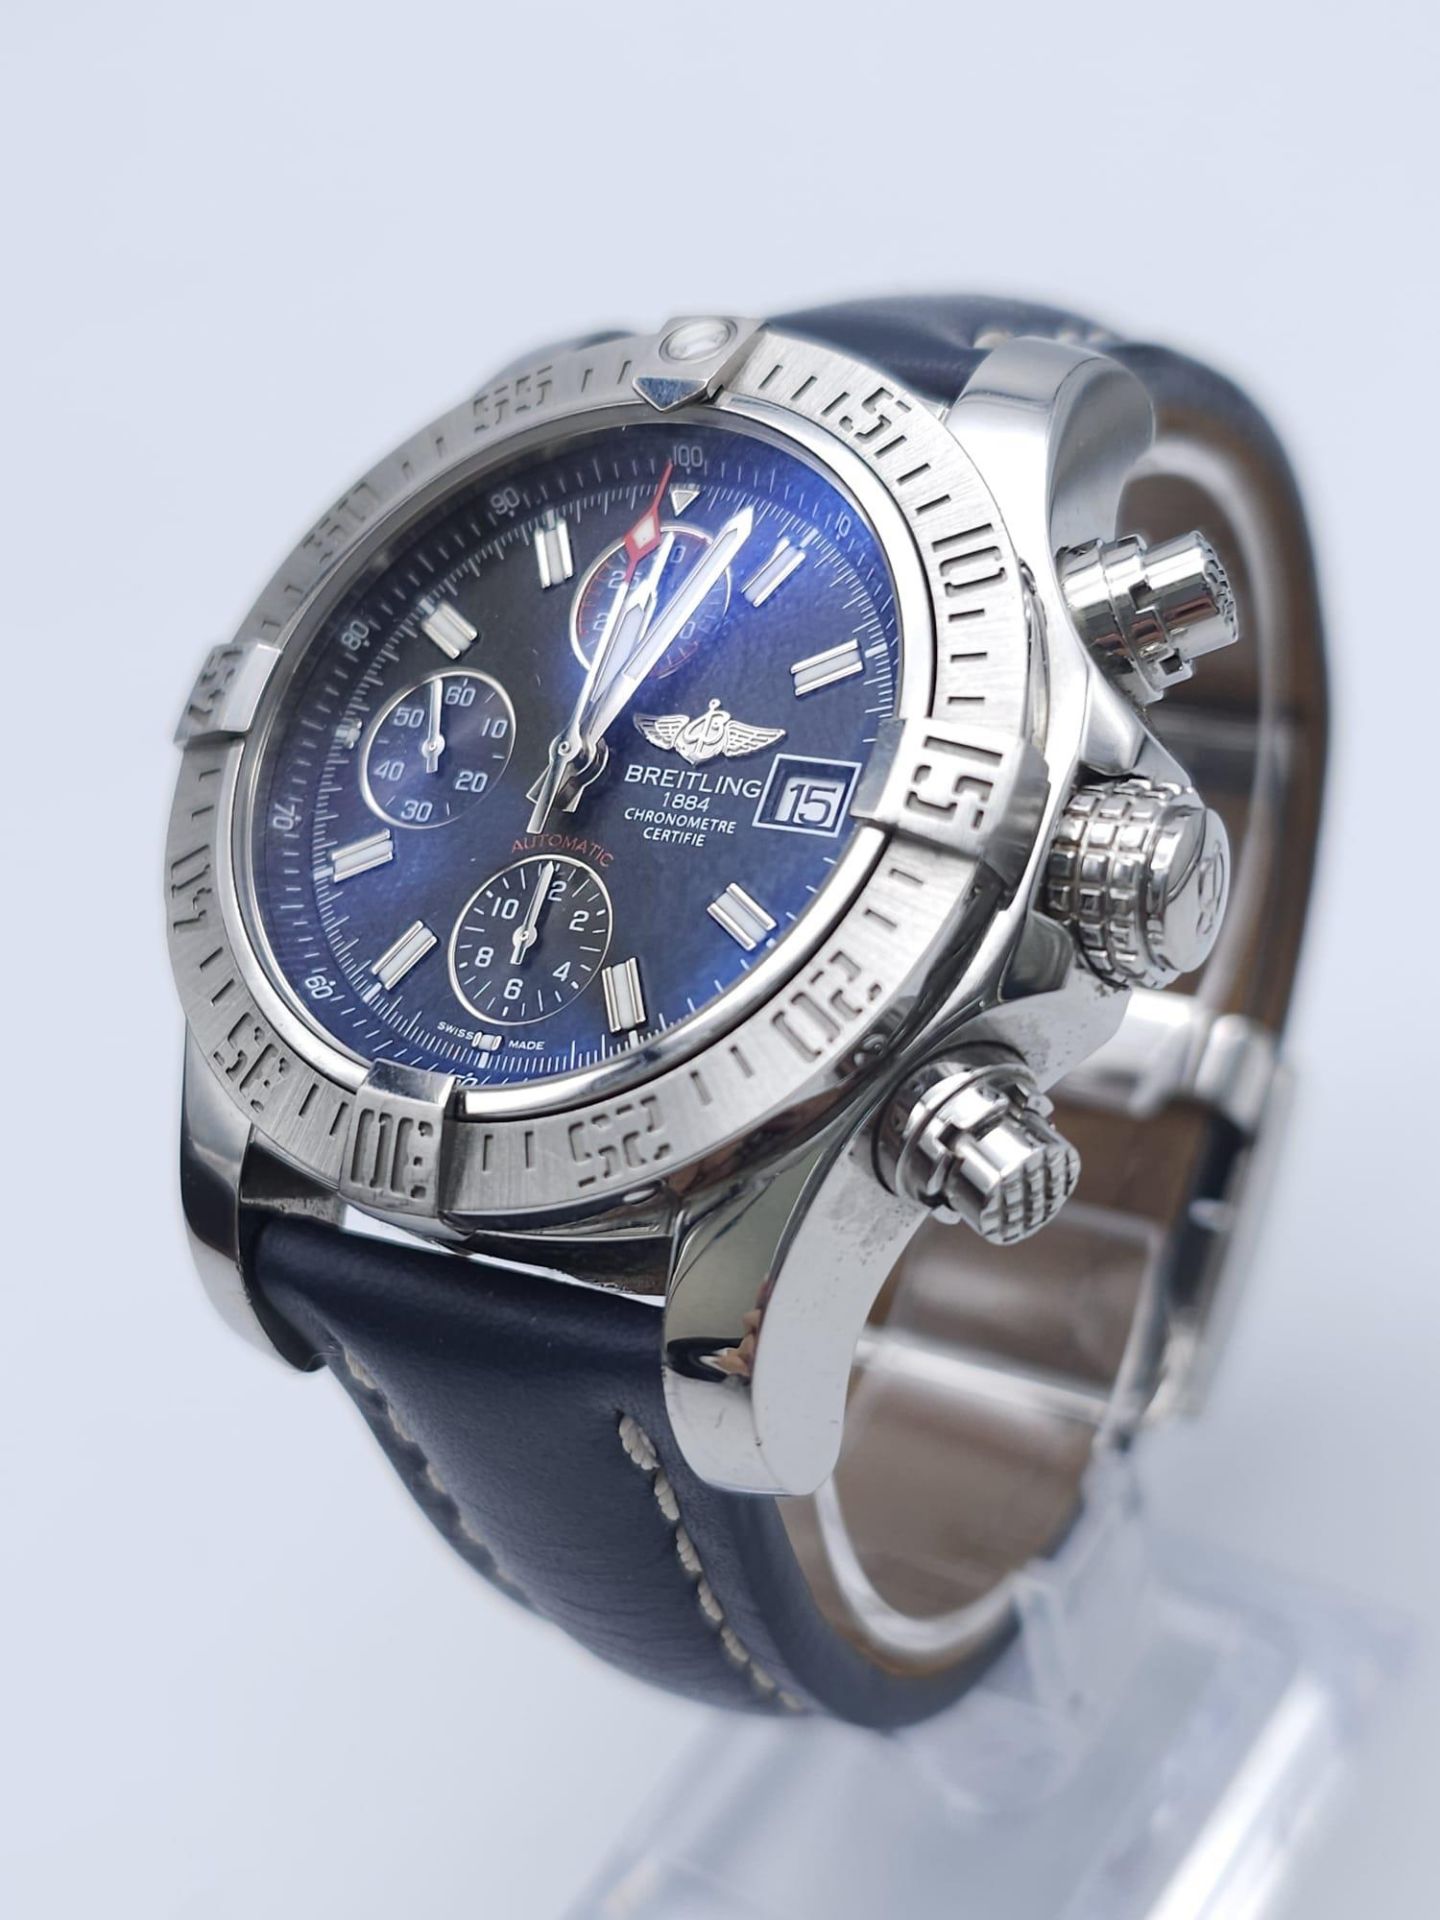 A Breitling Automatic Chronograph Avenger II Gents Watch. Blue leather strap. Stainless steel case - - Image 2 of 20